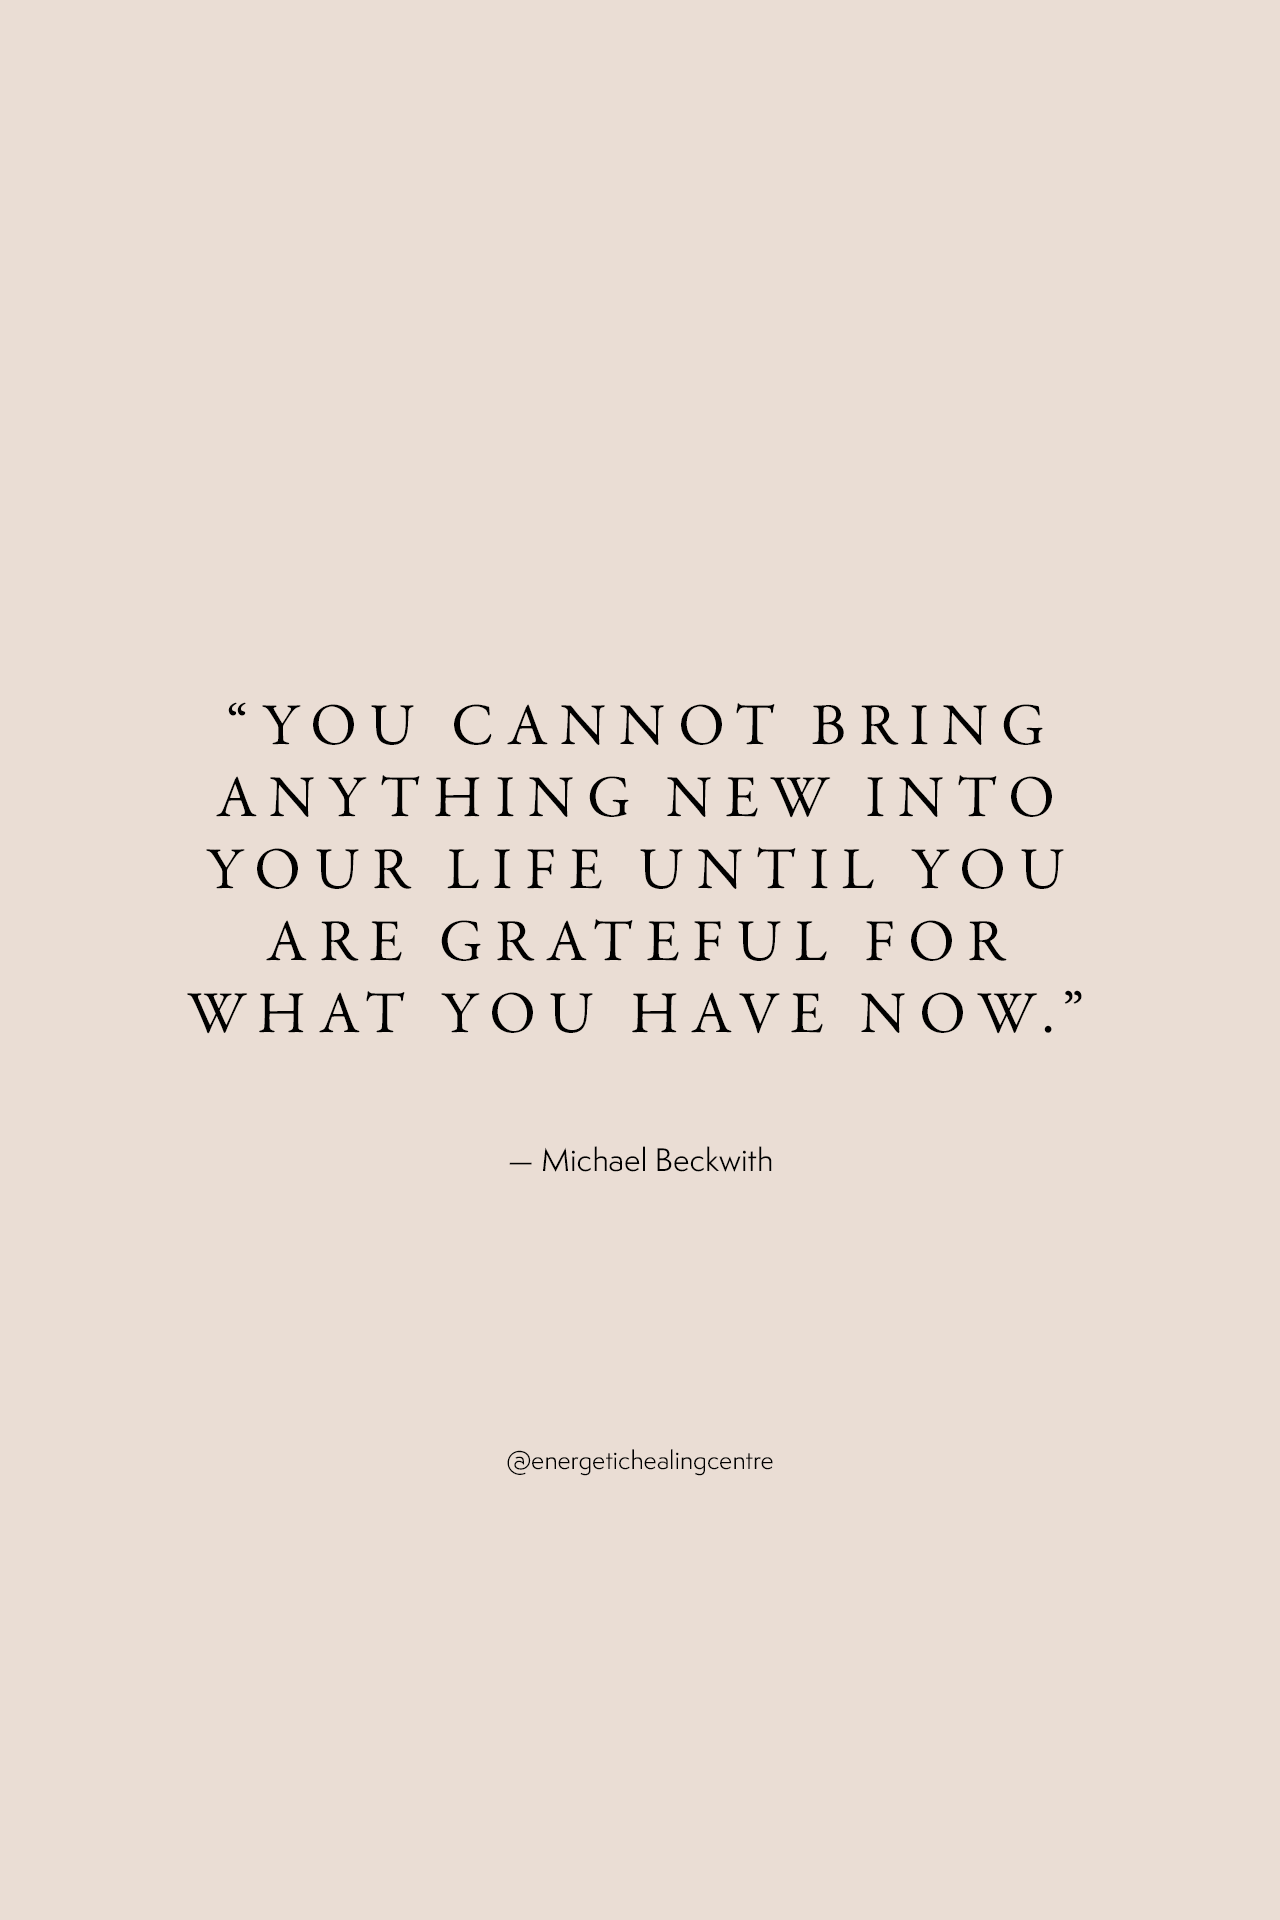 gratitude quotes - you cannot bring anything new into your life unti you are grateful for what you have now